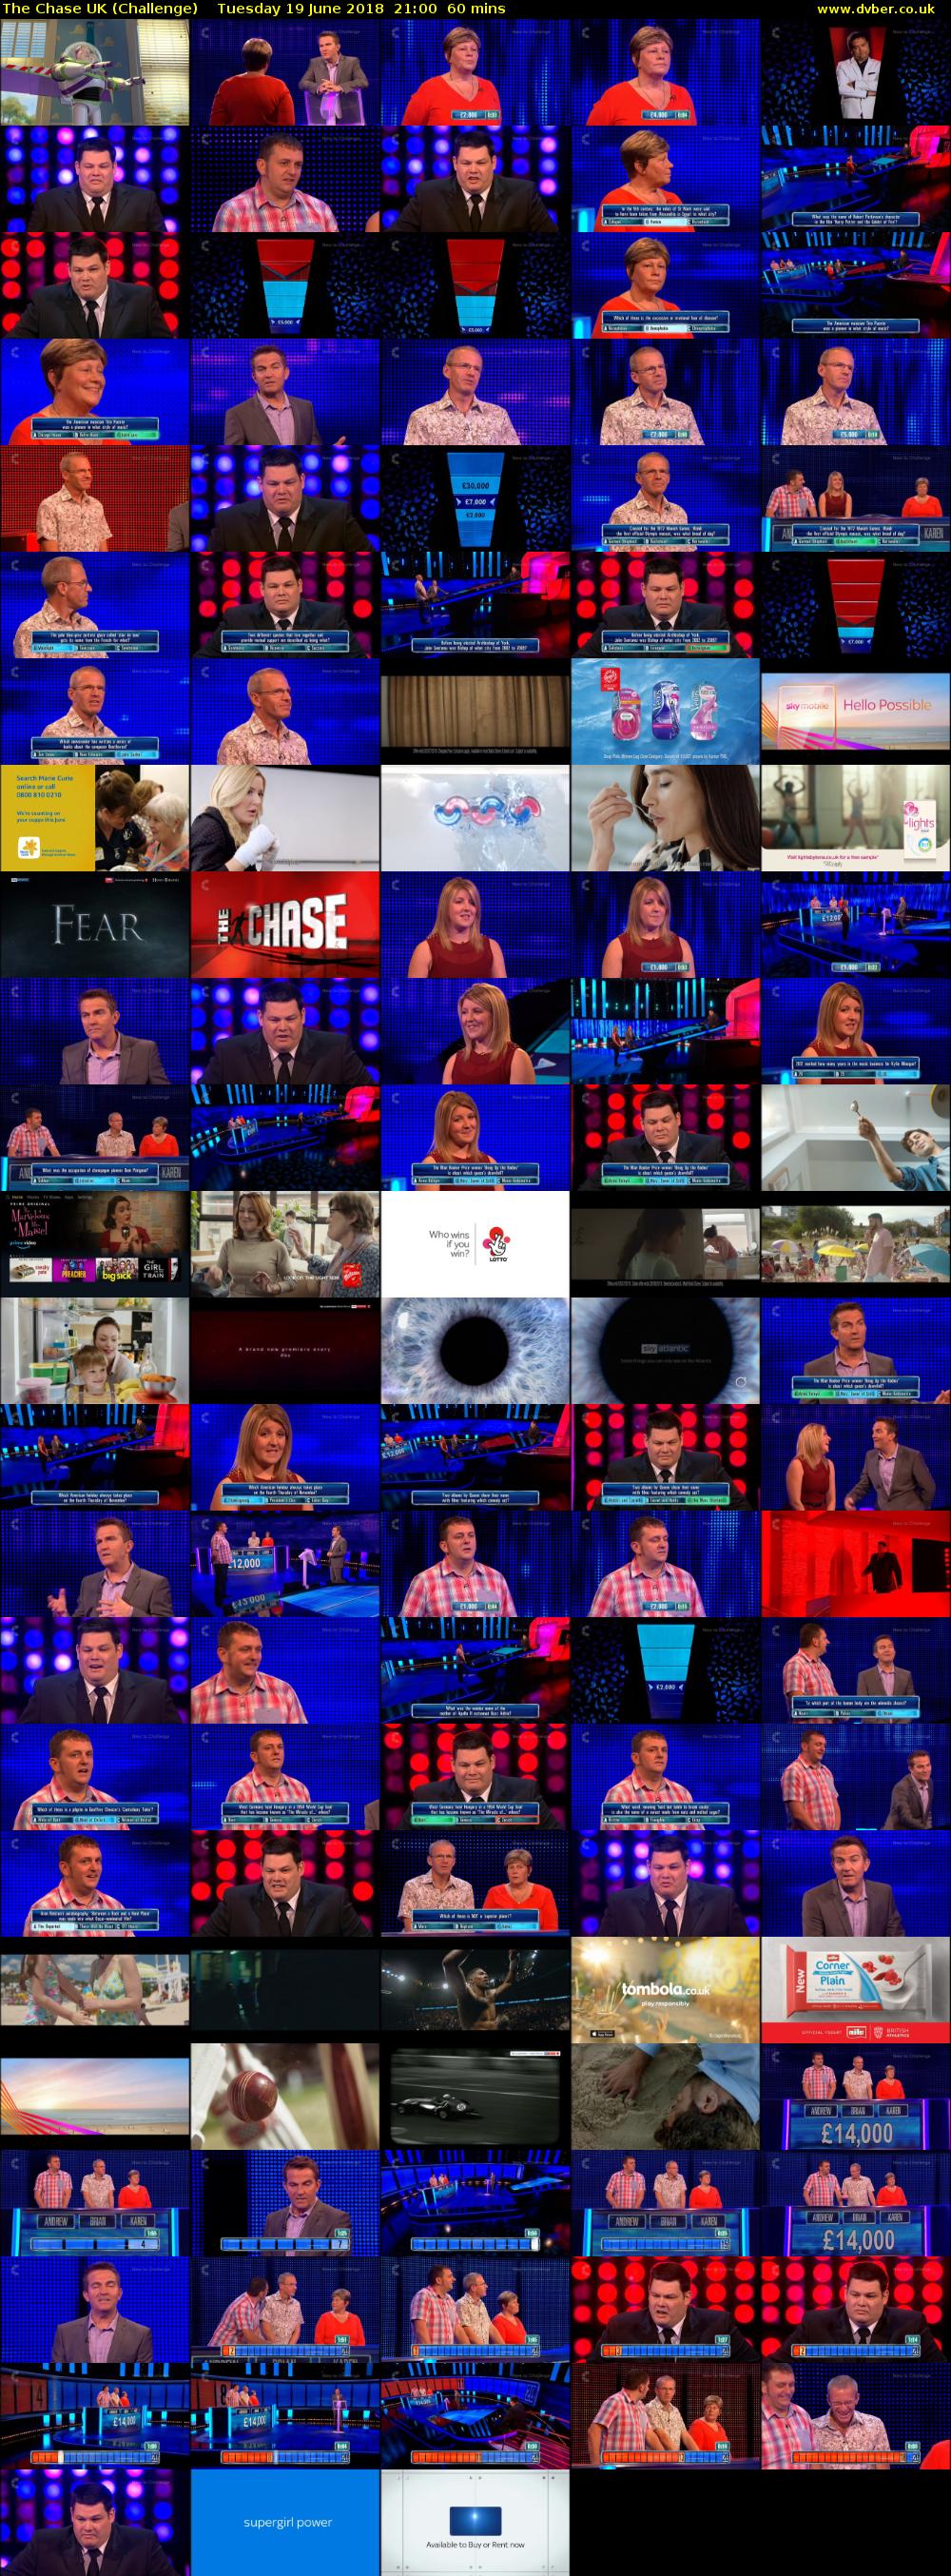 The Chase UK (Challenge) Tuesday 19 June 2018 21:00 - 22:00